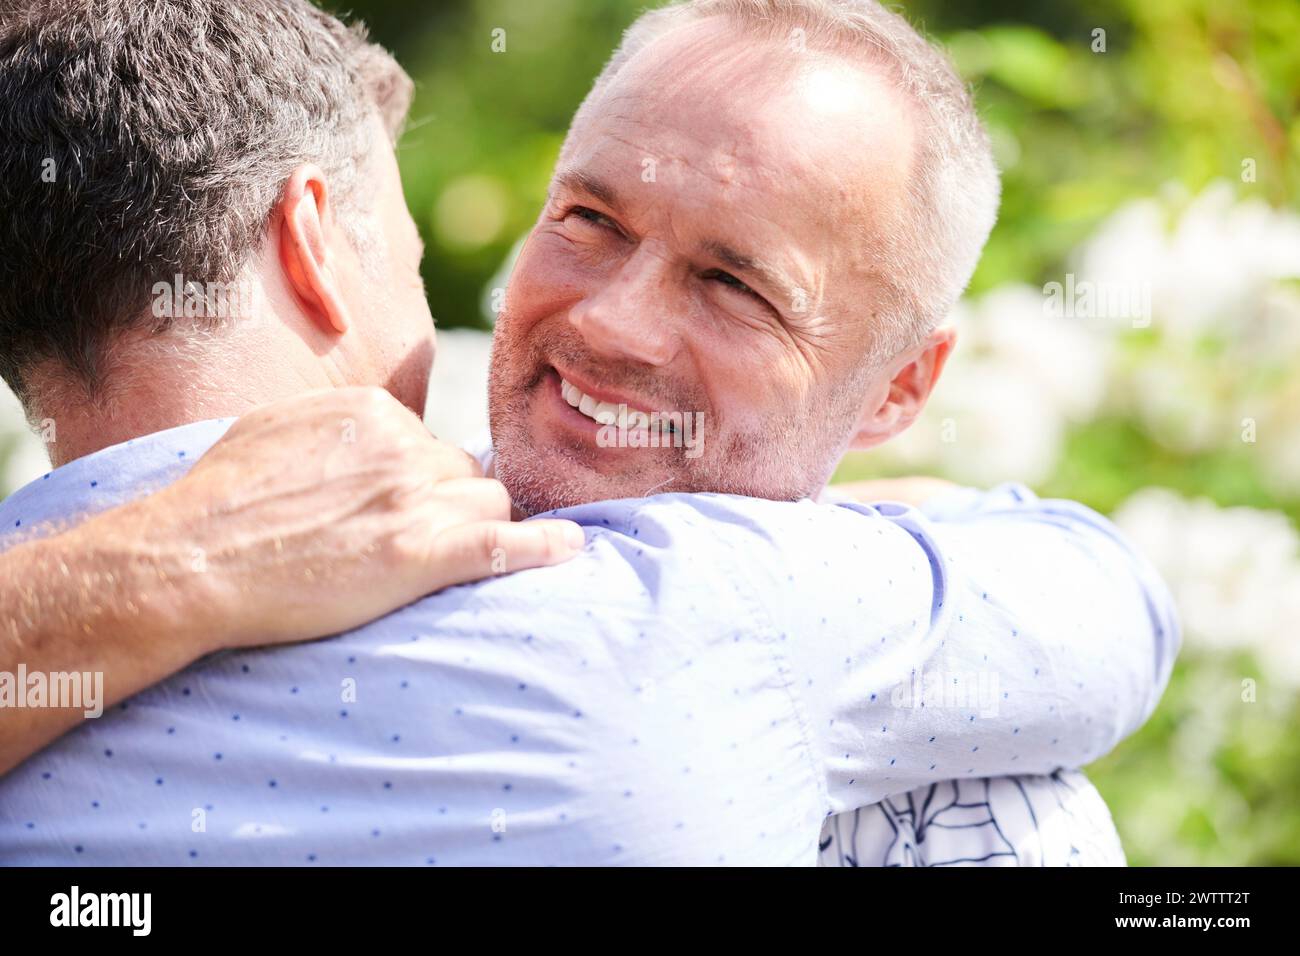 Two men embracing with smiles Stock Photo